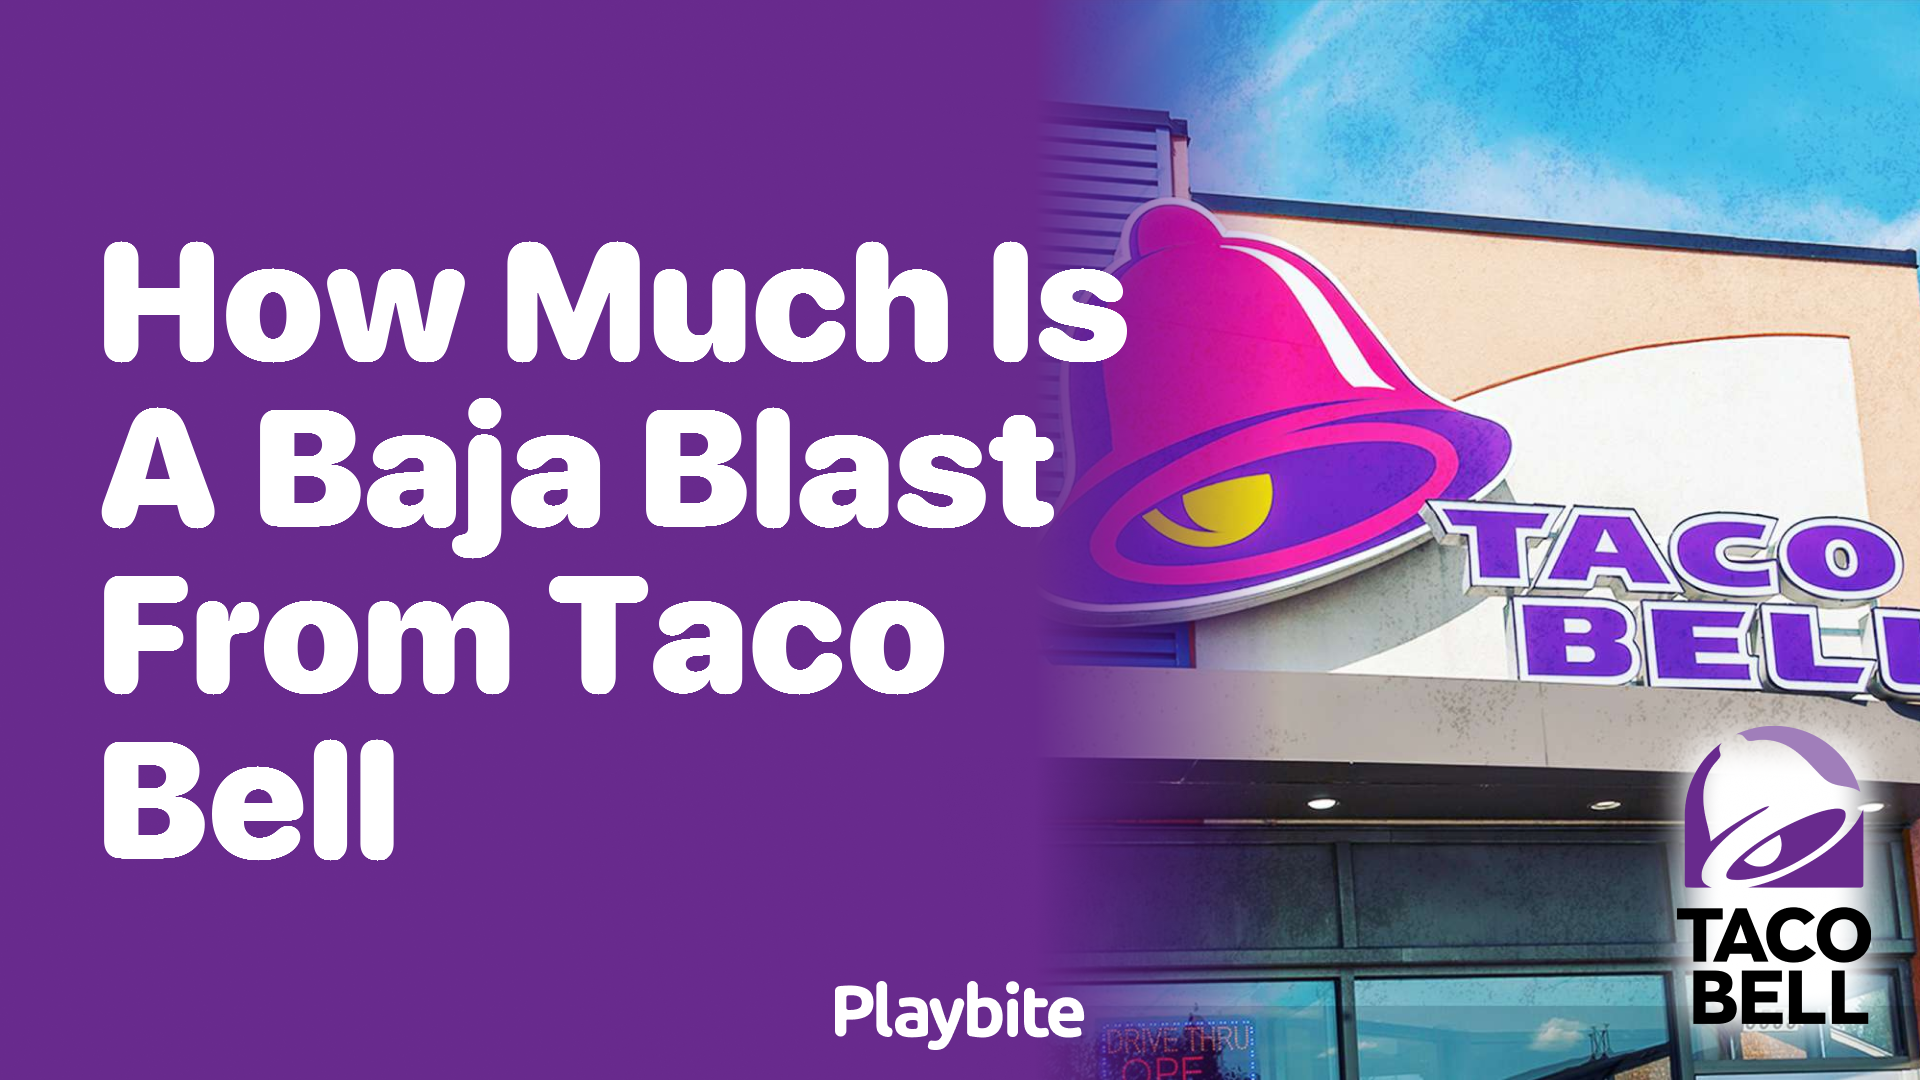 How Much Does a Baja Blast from Taco Bell Cost?